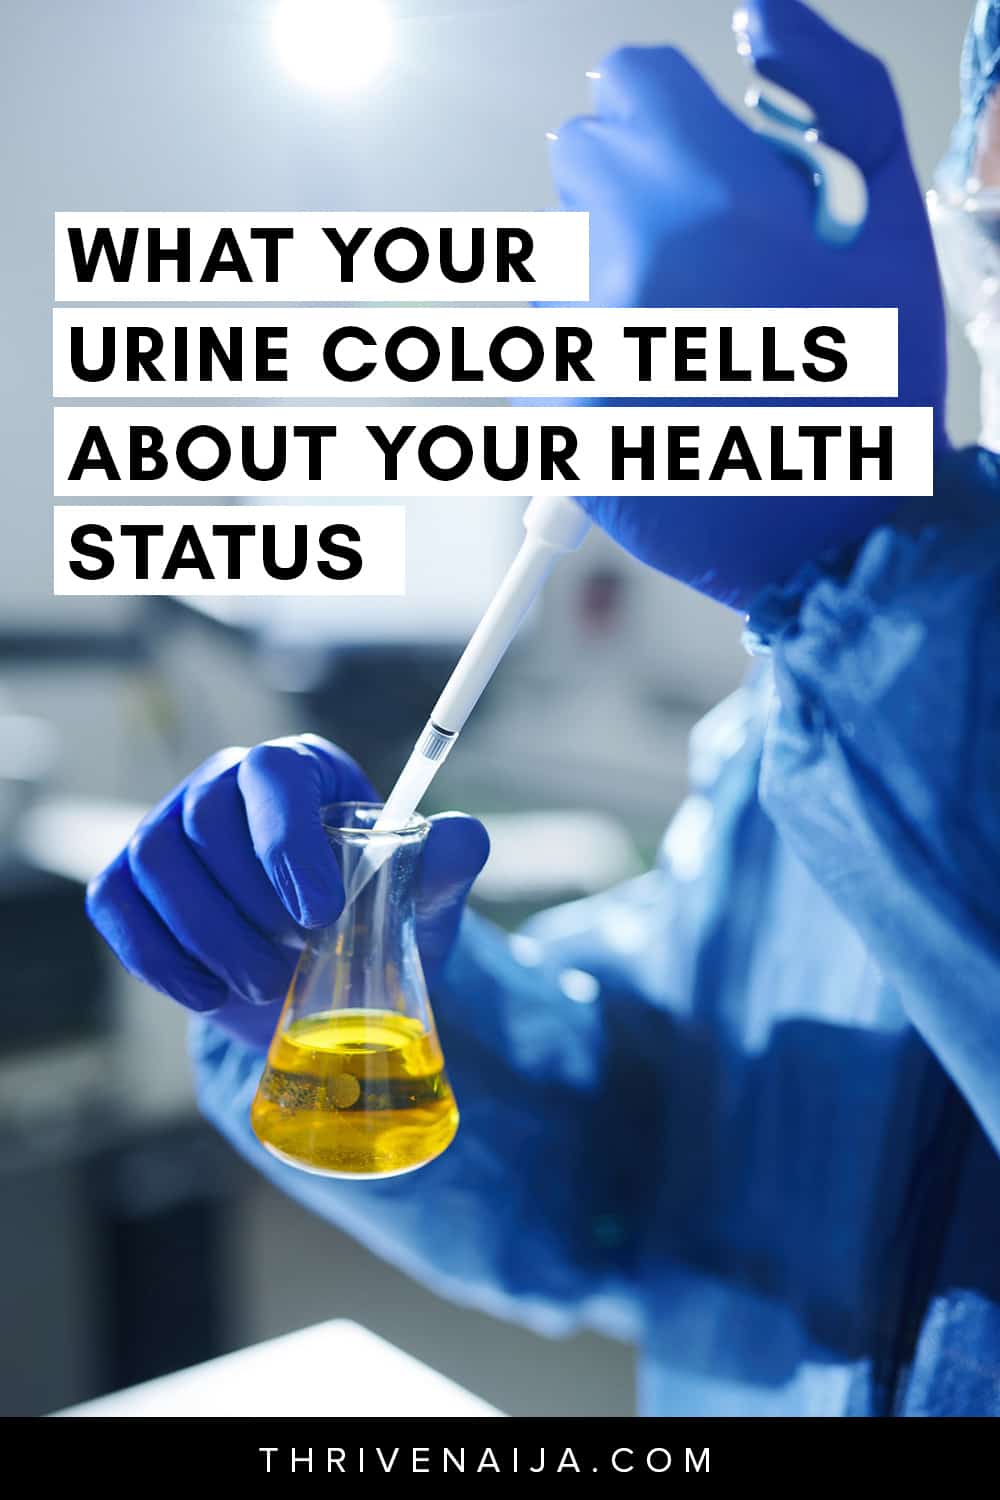 What Your Urine Color Tells About Your Health Status